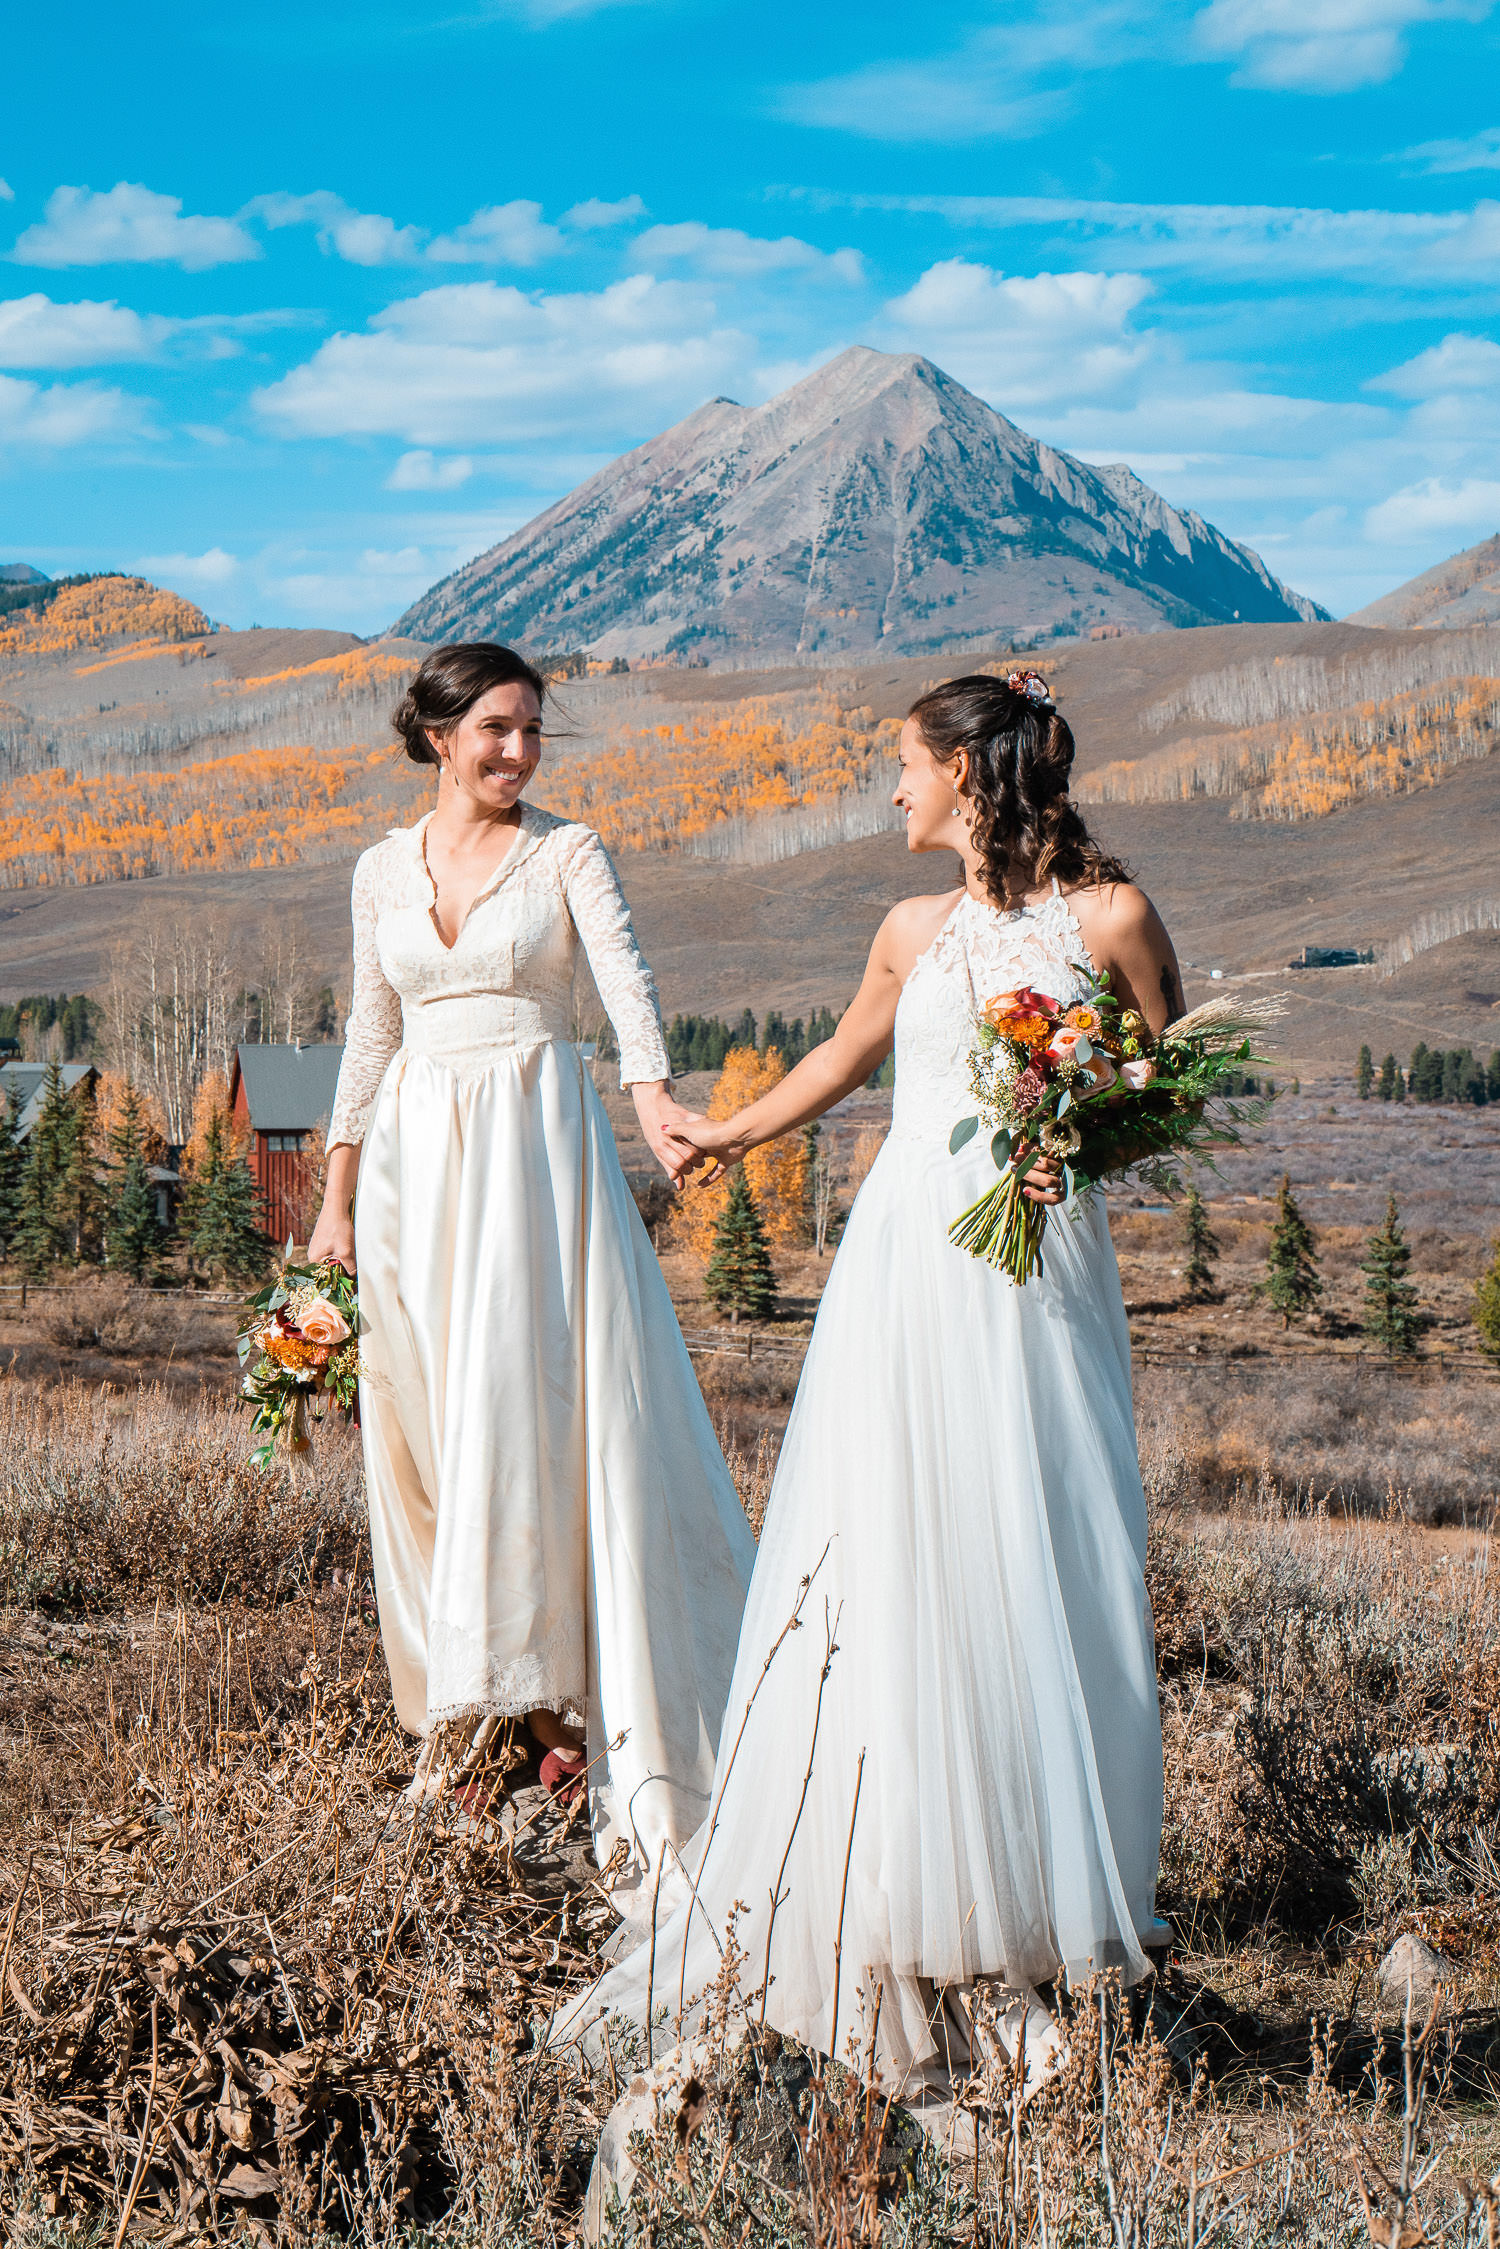 Brides eloping in Crested Butte Colorado